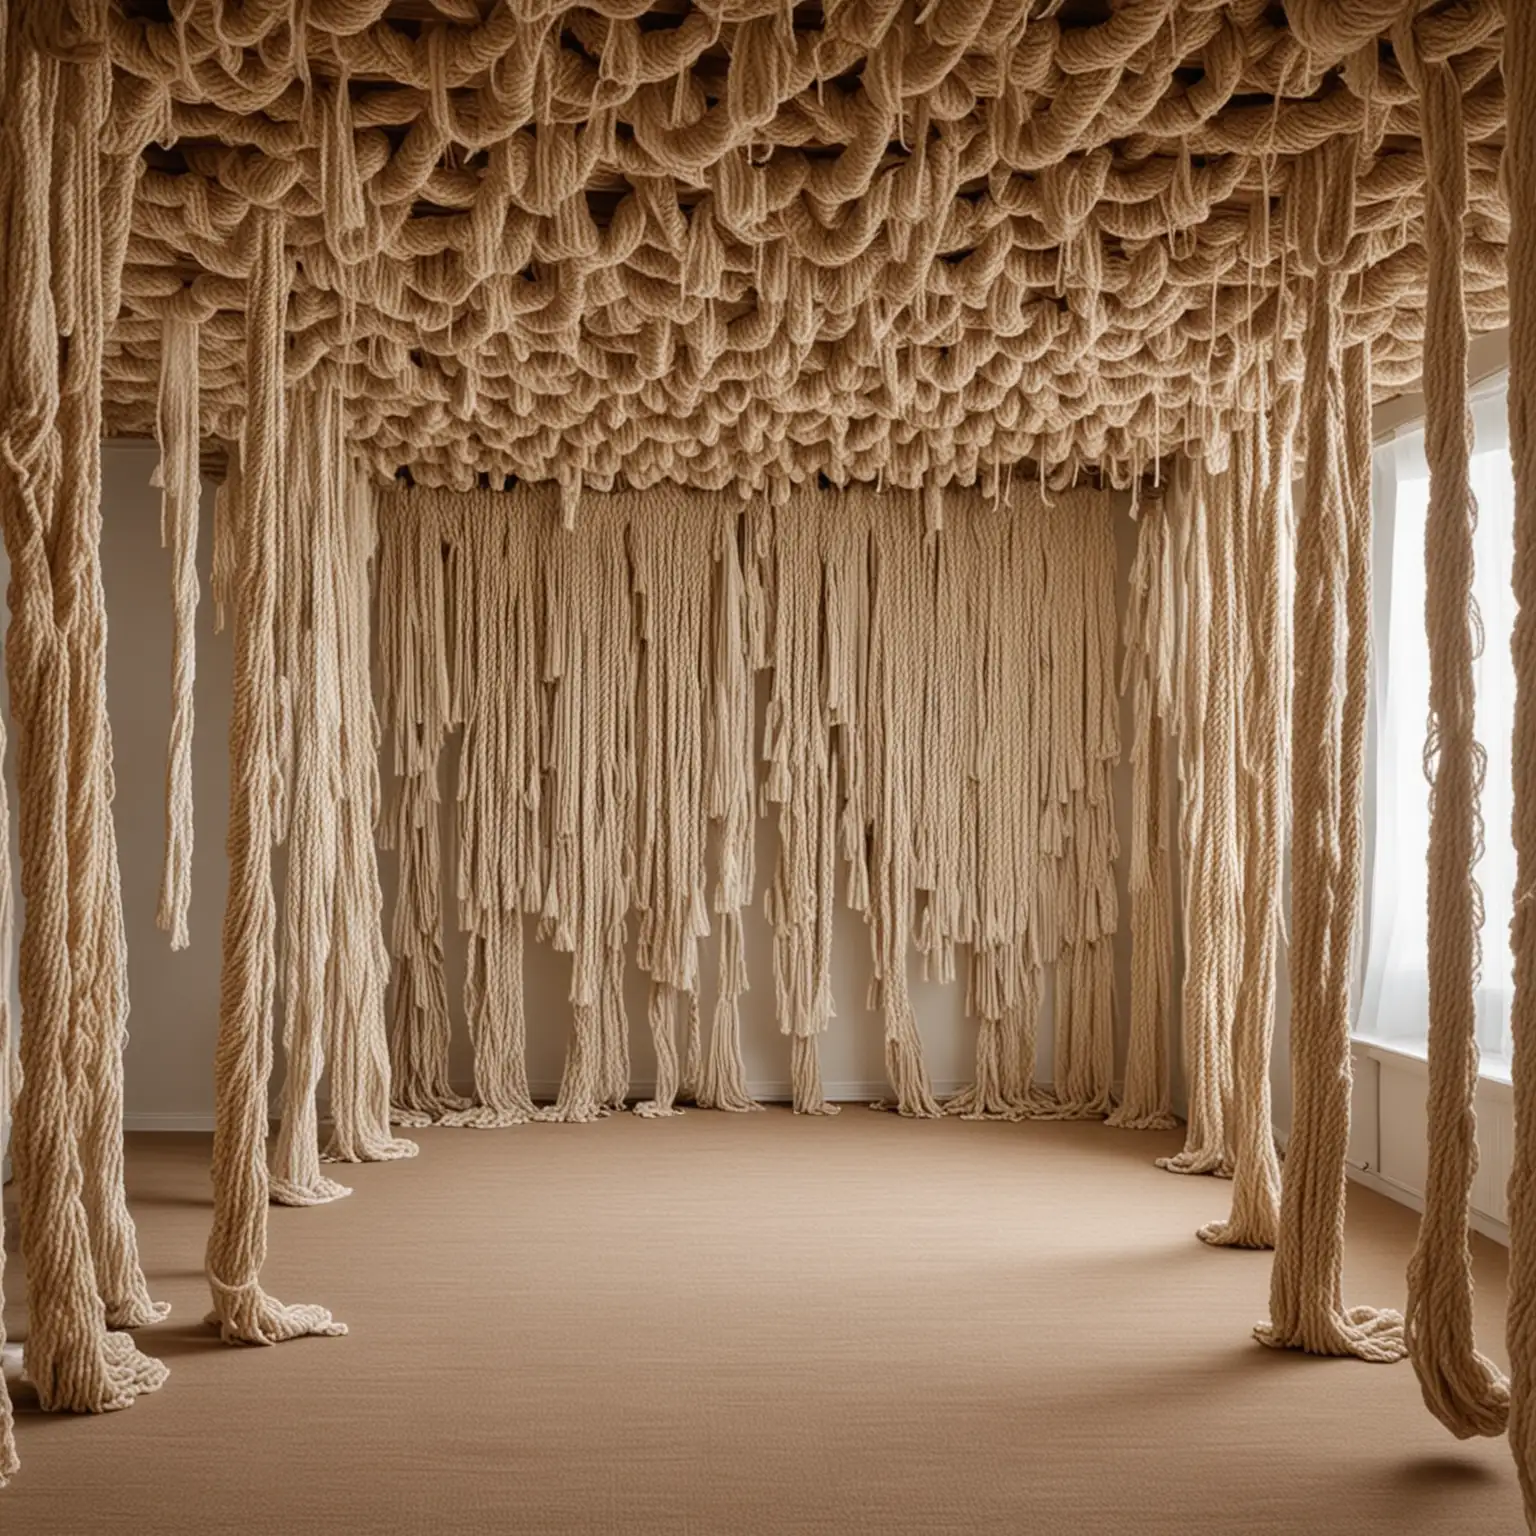 Cozy Knitted Room with Woven Rope Ceiling